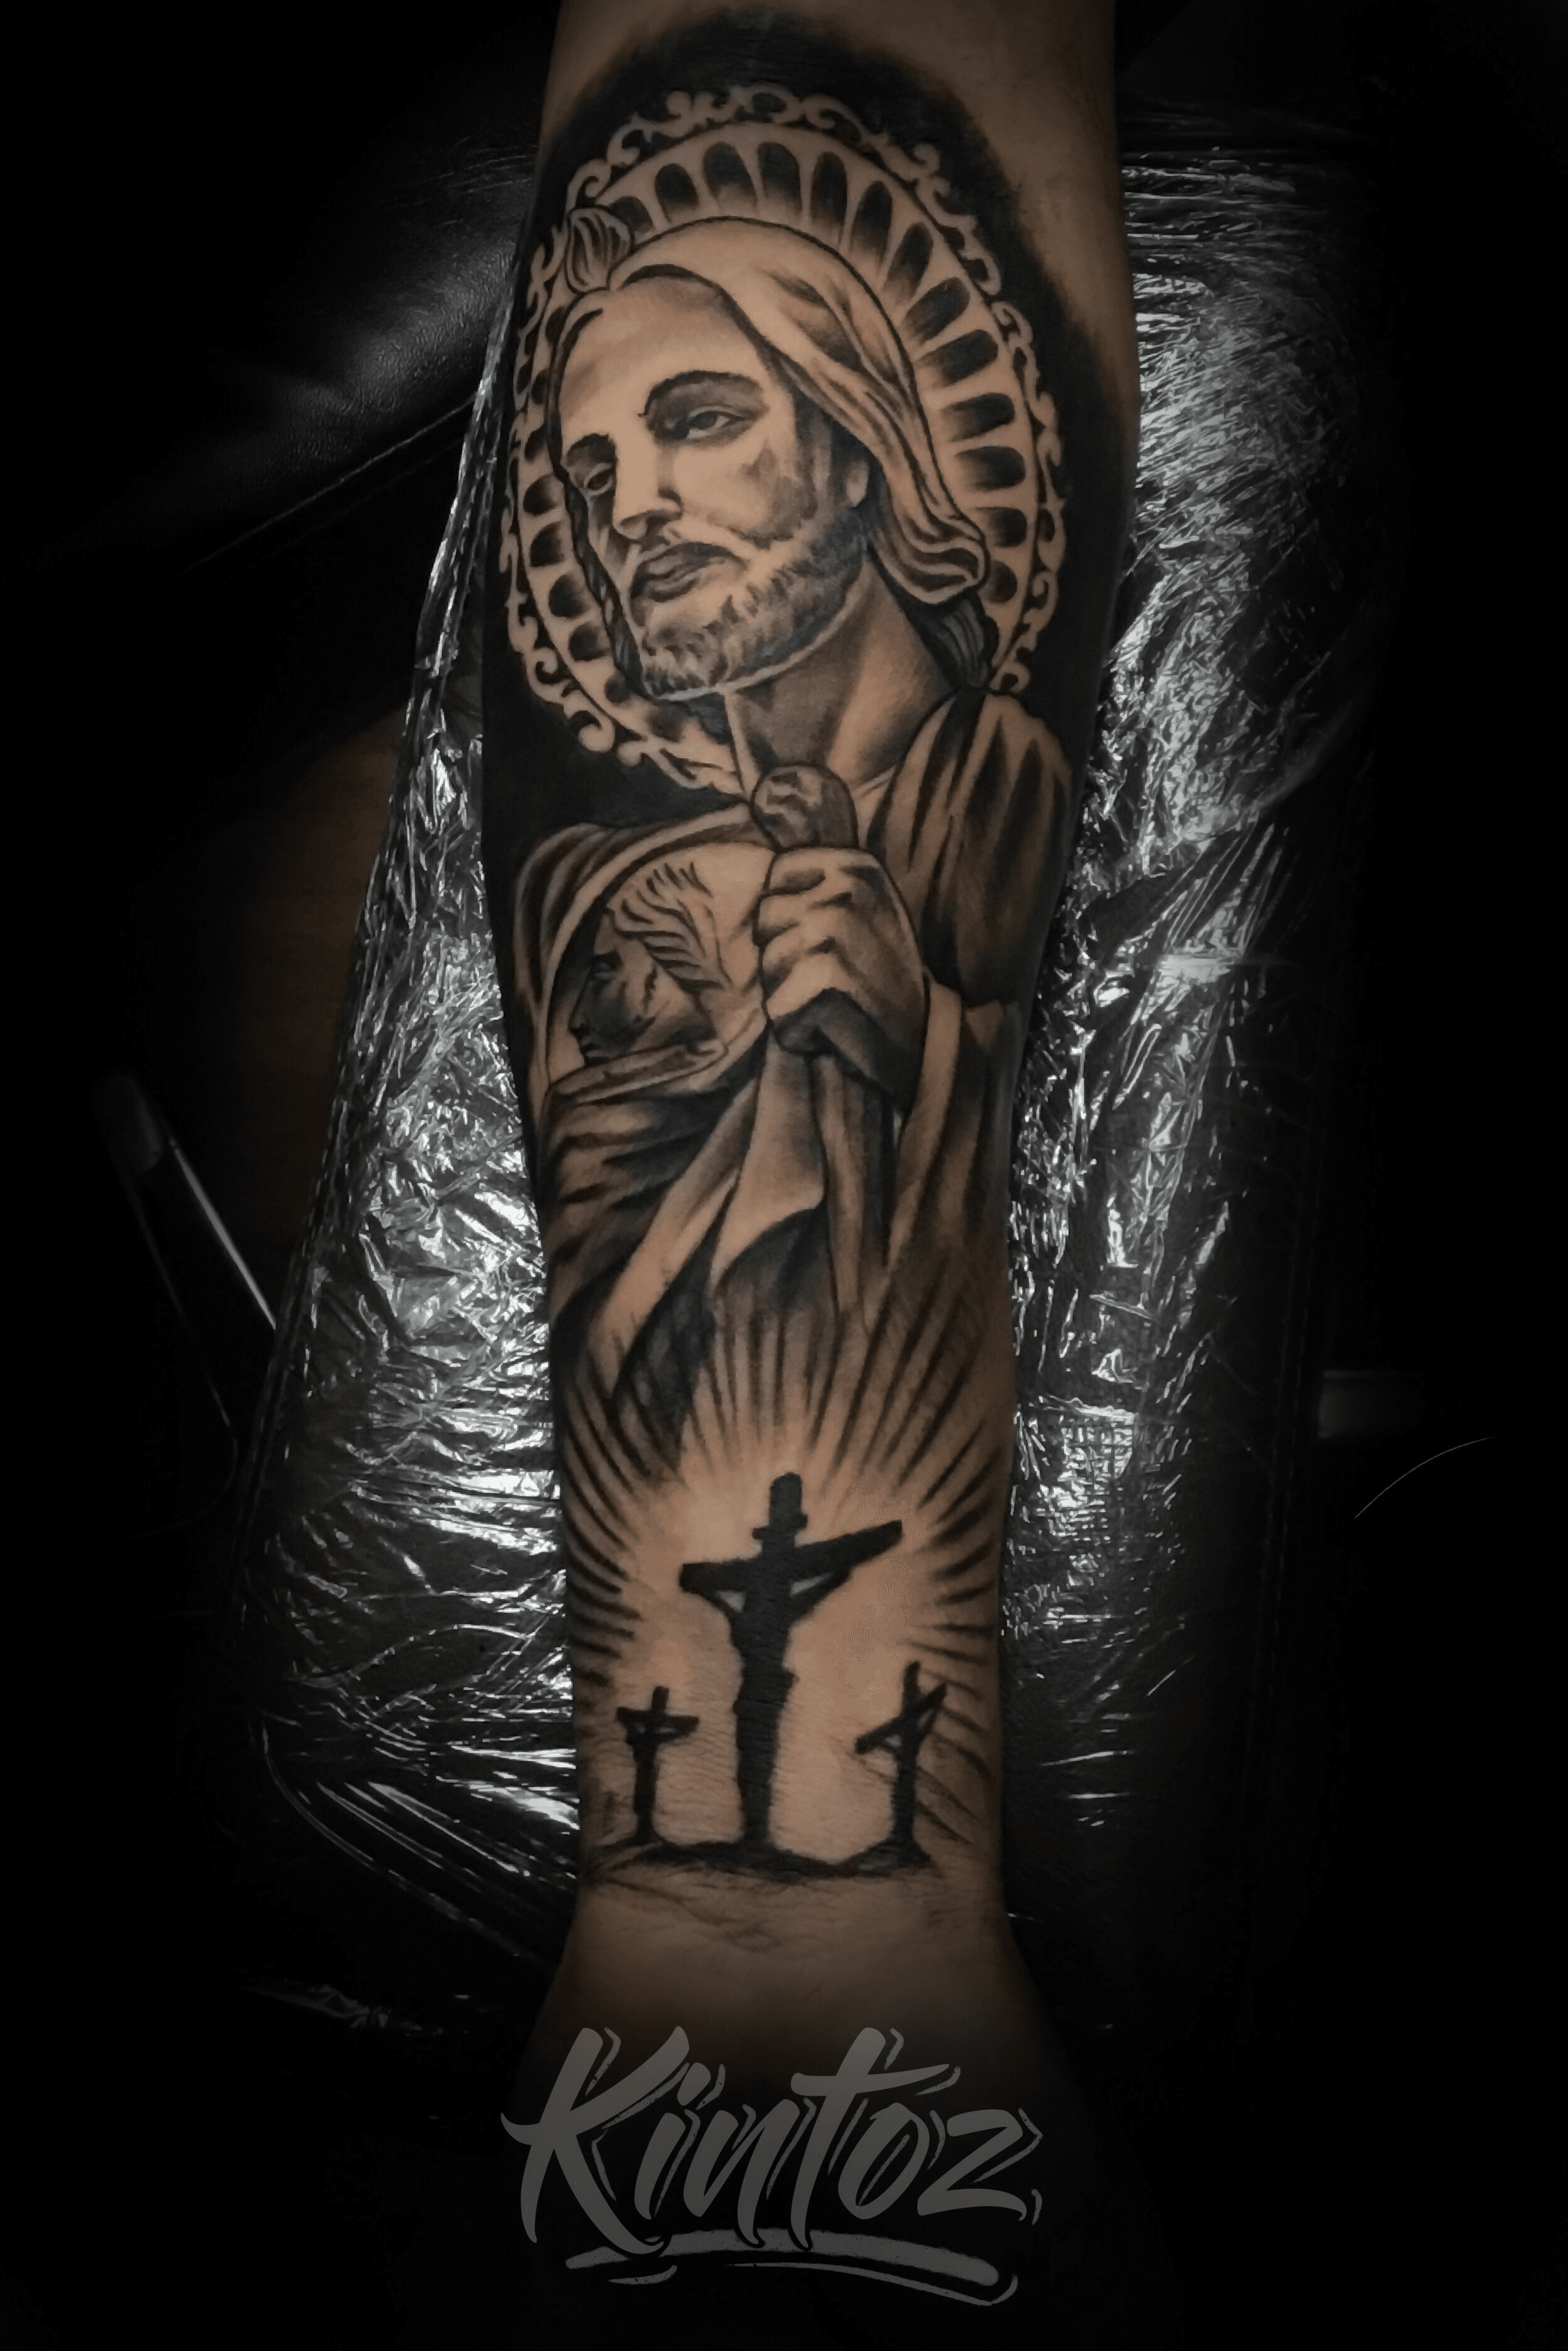 68 San Judas Tattoo Ideas You Have To See To Believe  Outsons